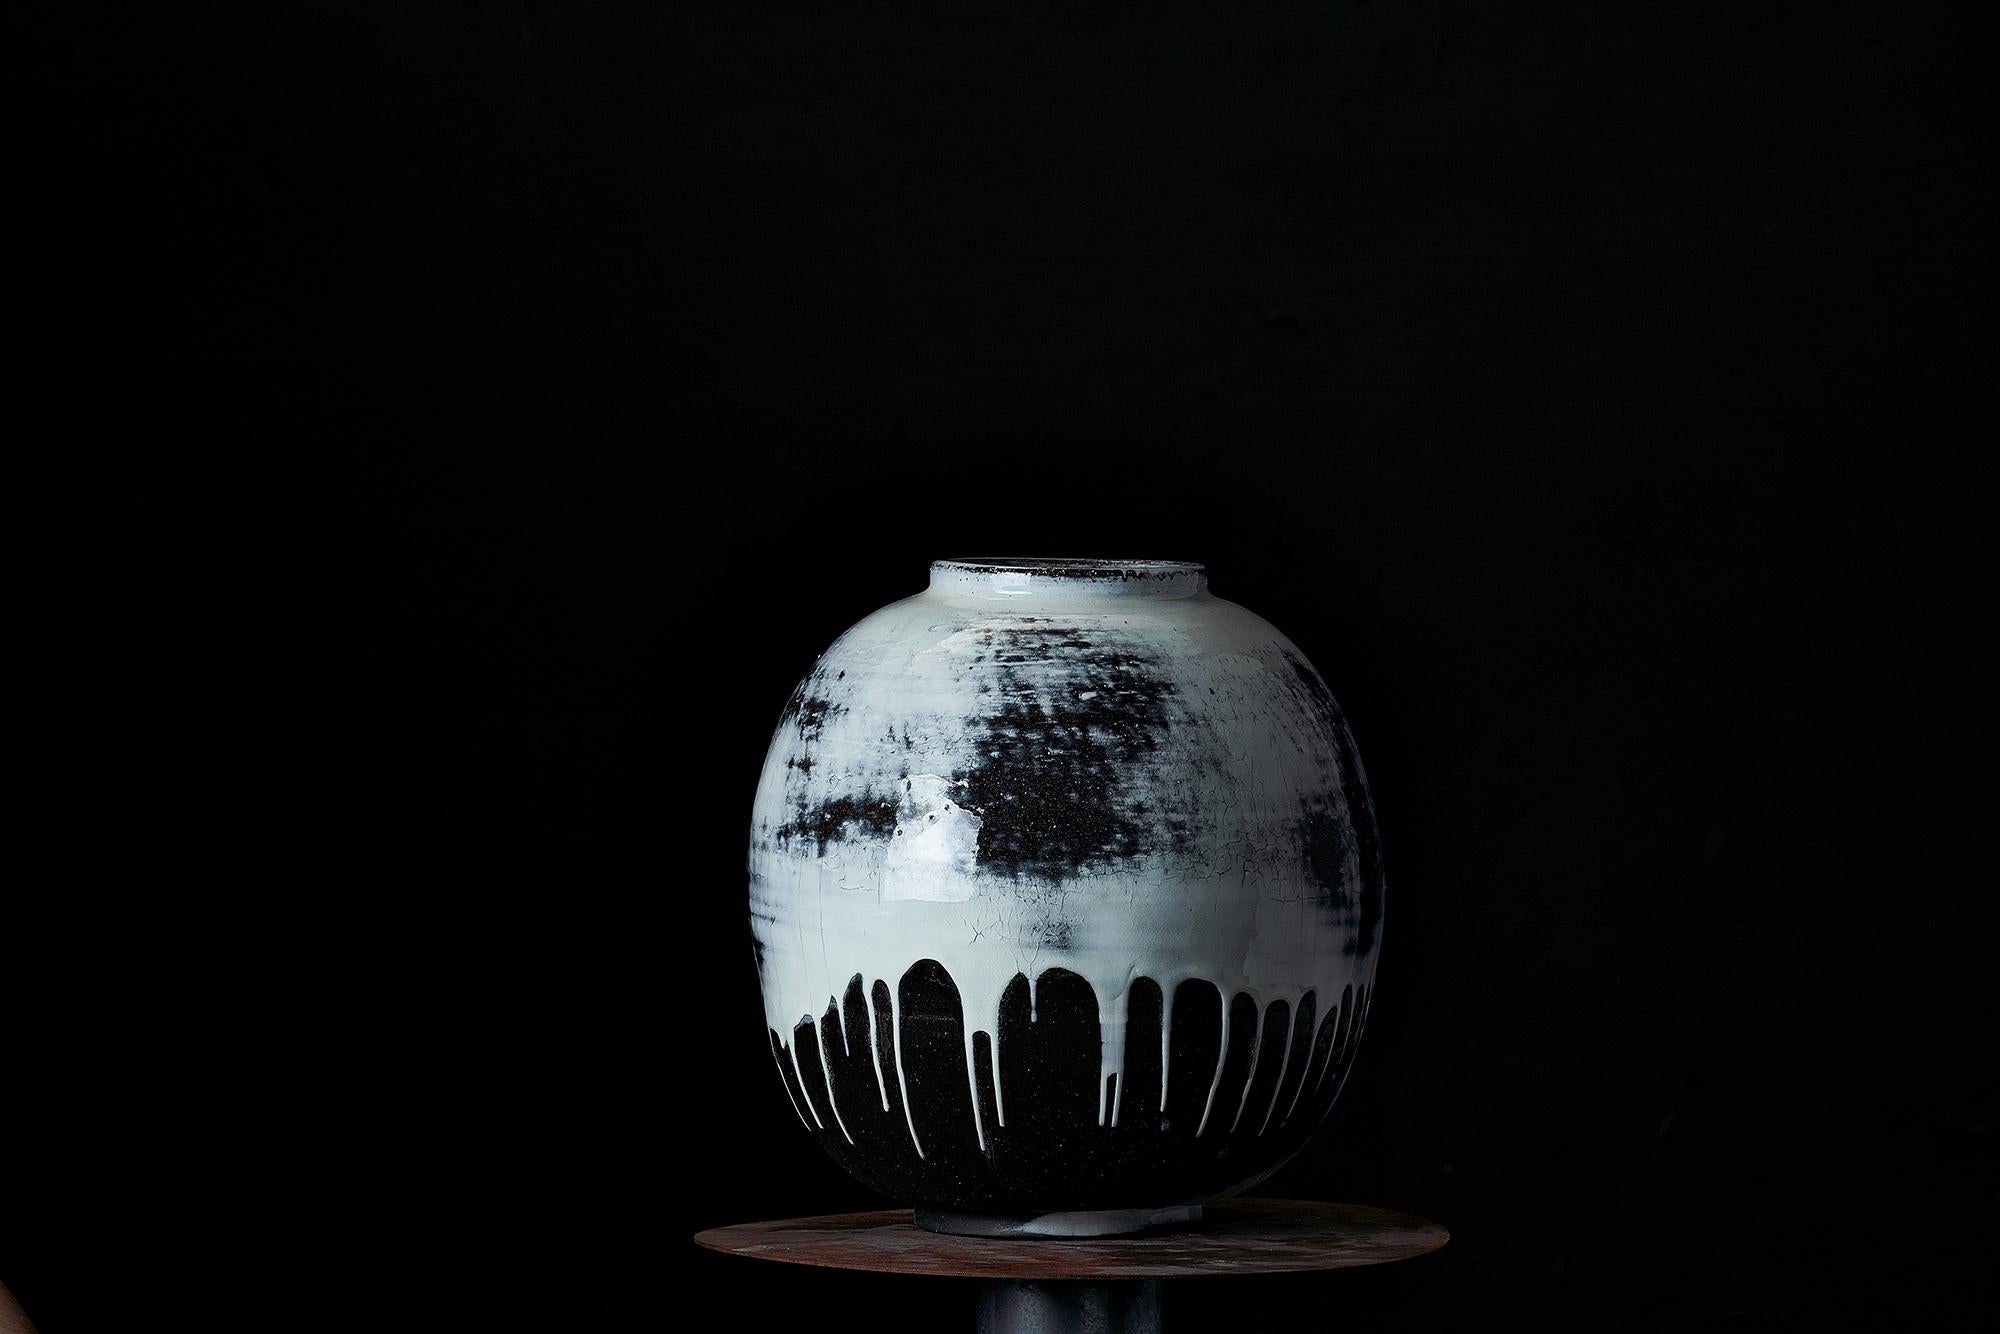 Monochromatic Landscape Moon Jar
It represents the material-in-itself and material-as-it-is, such as a monochromatic moon jar, and expresses a monochromatic landscape with a juxtaposition hybrid of materials with different properties. I attempt to